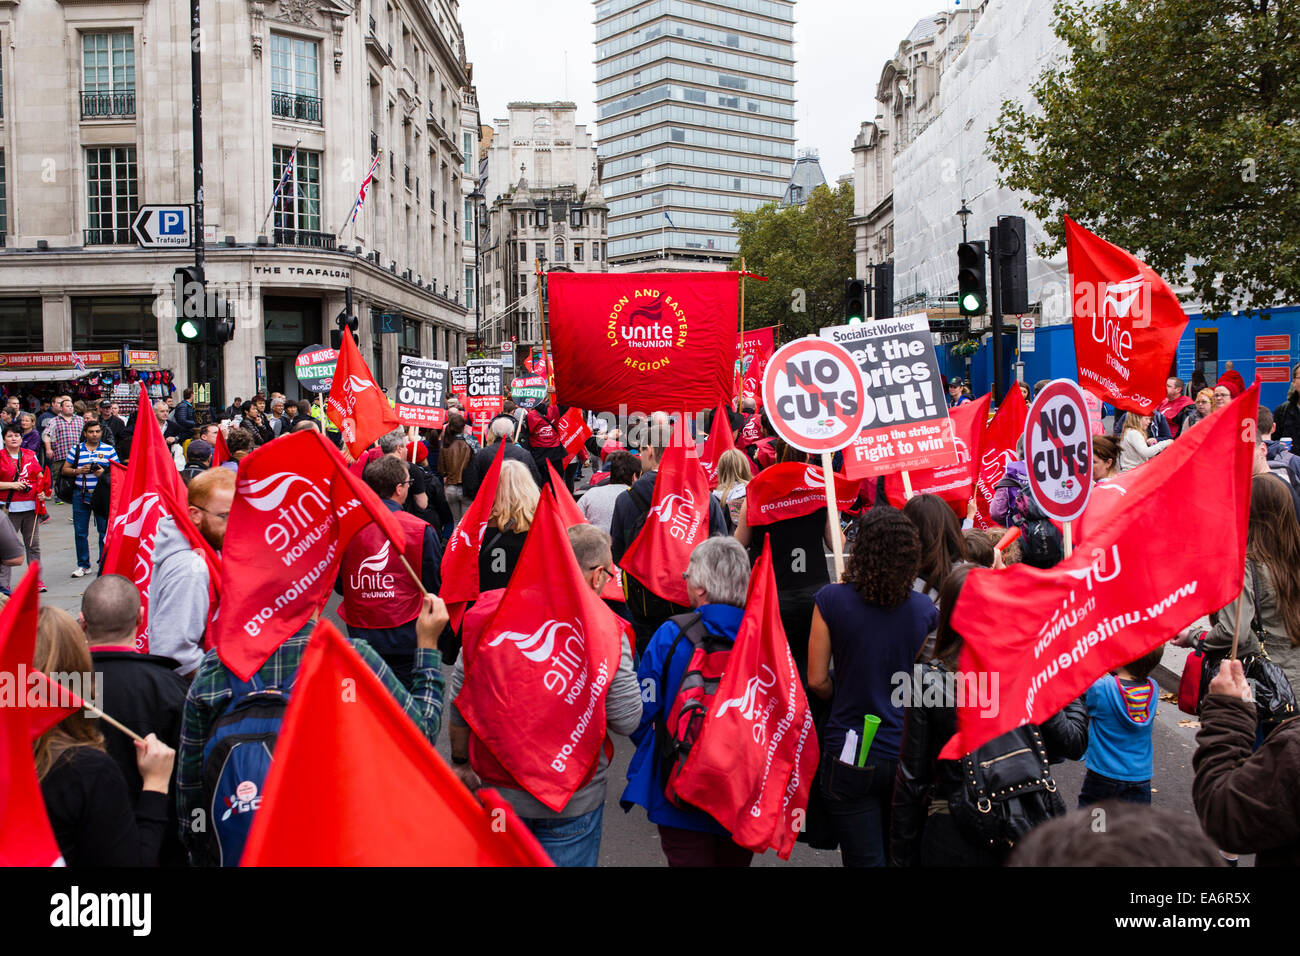 Trade Union protesters march through London on 18th October 2014 to demonstrate against government austerity and cuts Stock Photo